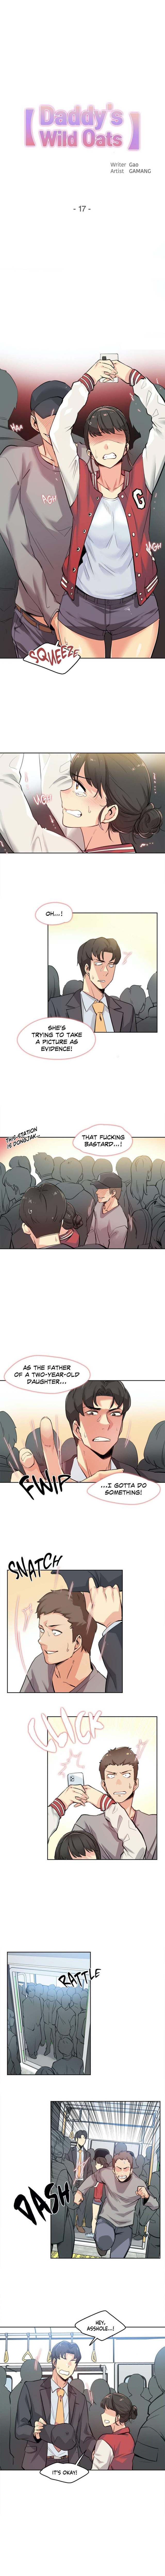 DADDY'S WILD OATS | Surrogate Father Ch. 1-19 115